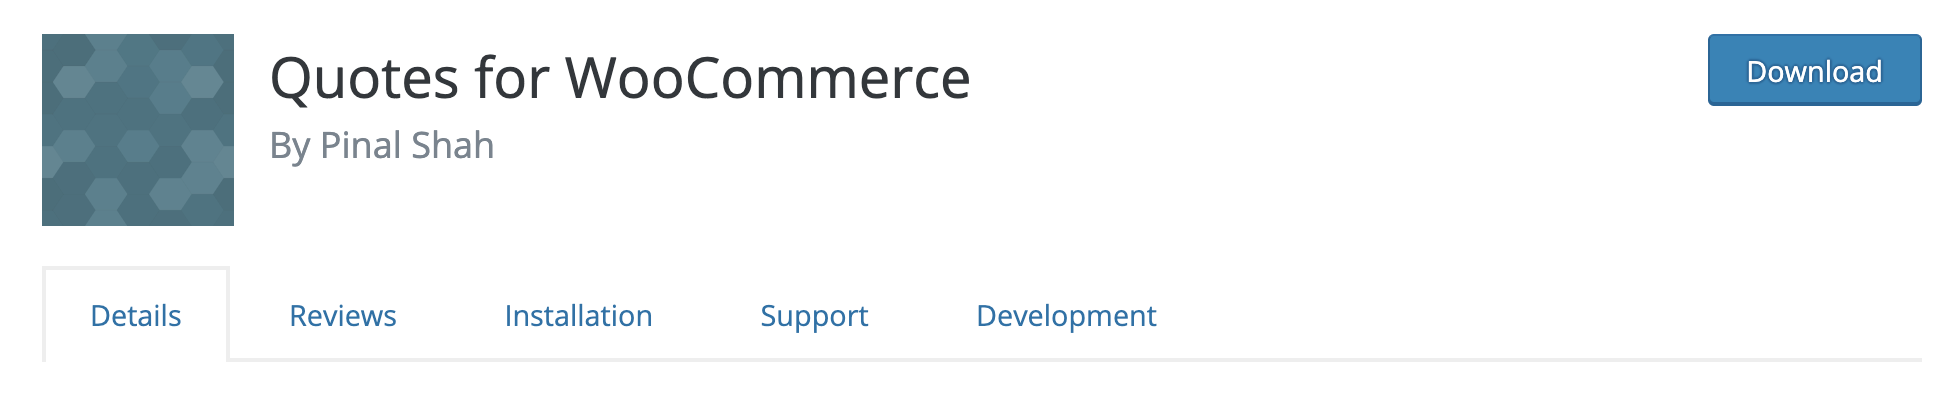 Quotes for WooCommerce 